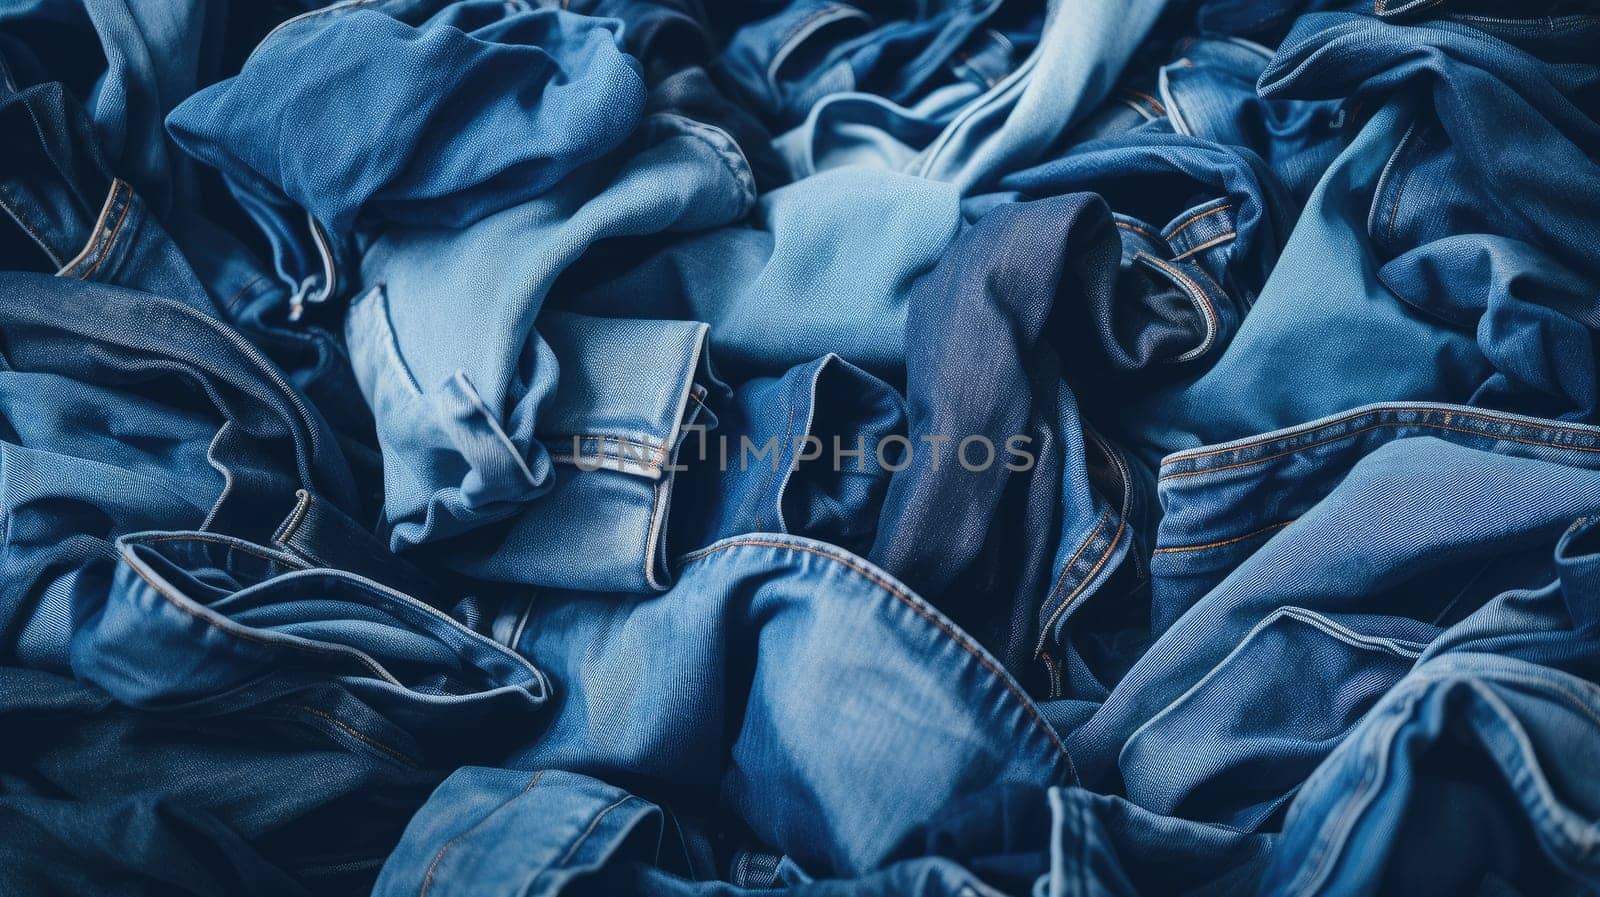 Assorted Crumpled Blue Jeans - Top View Denim Stack Background. Fashionable Variety of Textured Folded Denim. Stylish Clothing Display Ideal for Design Concepts, and Apparel Marketing Imagery